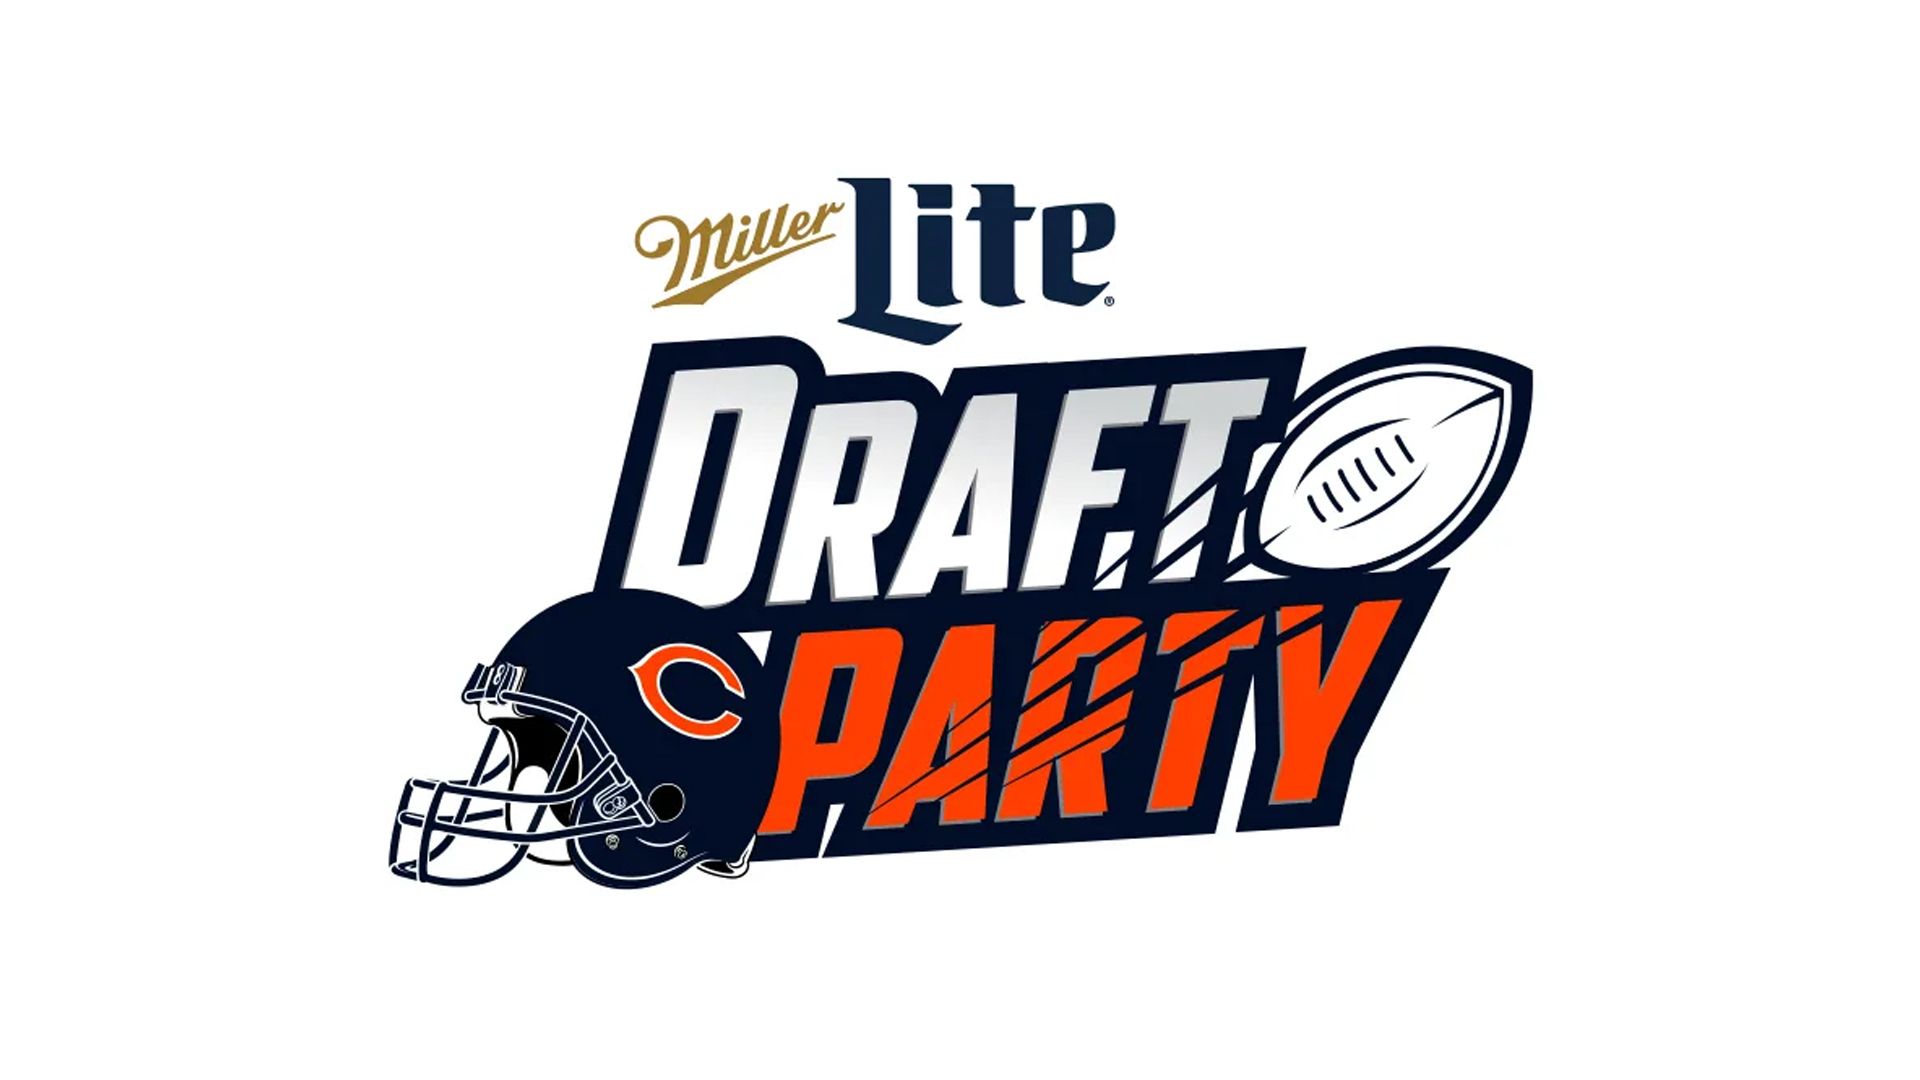 nfl draft party